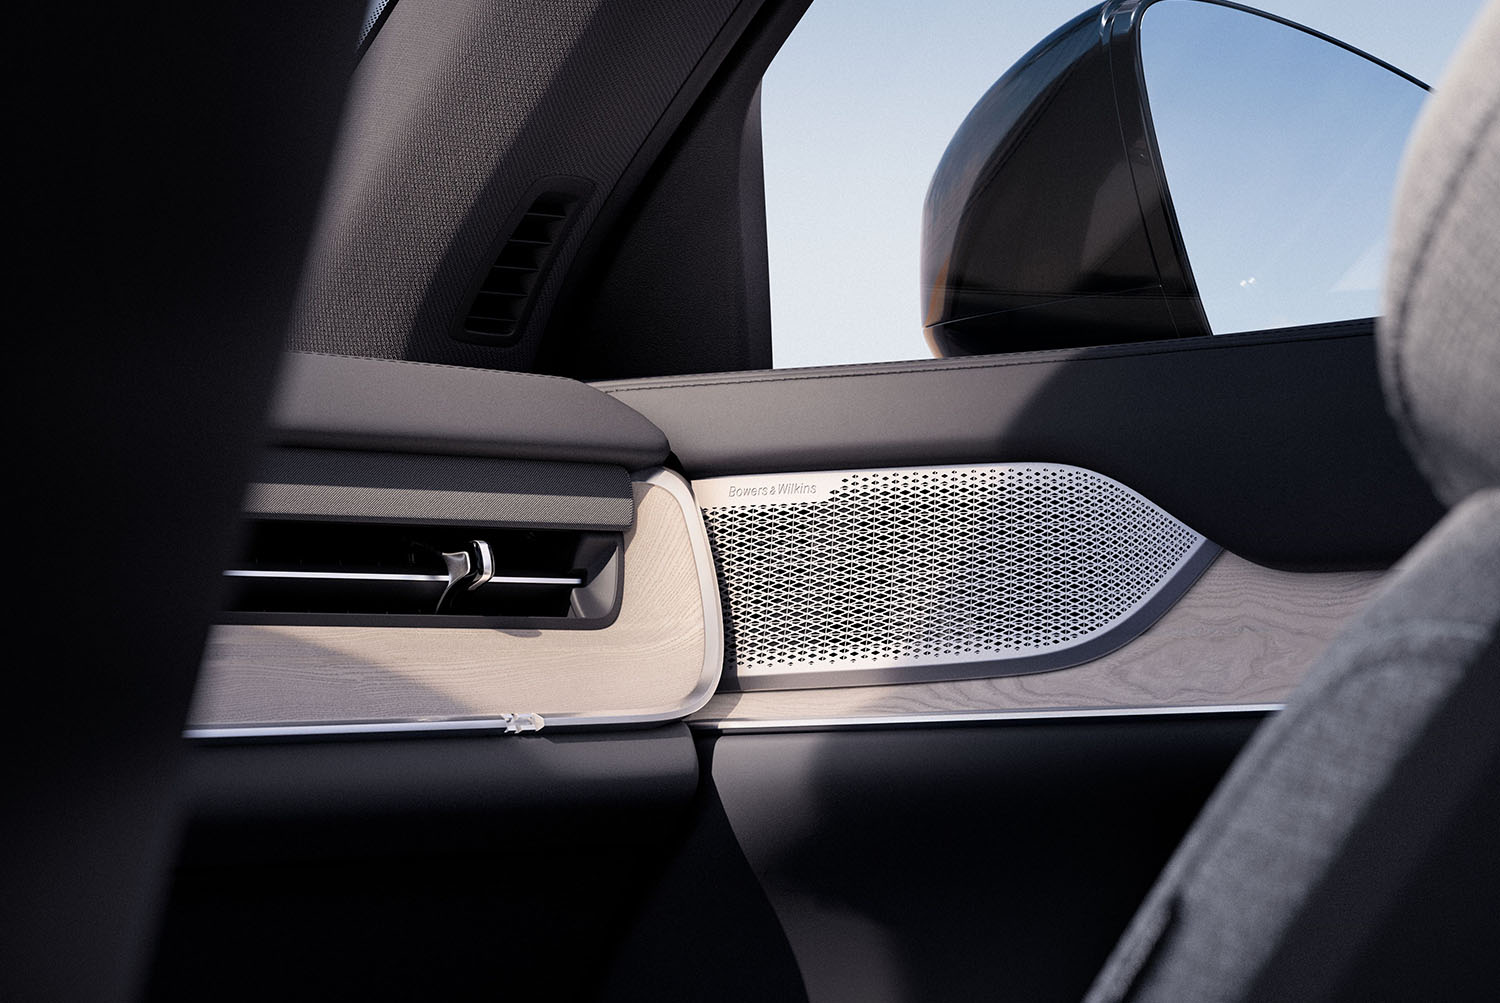 Bowers undefined Wilkins-branded speaker built into the door of a Volvo